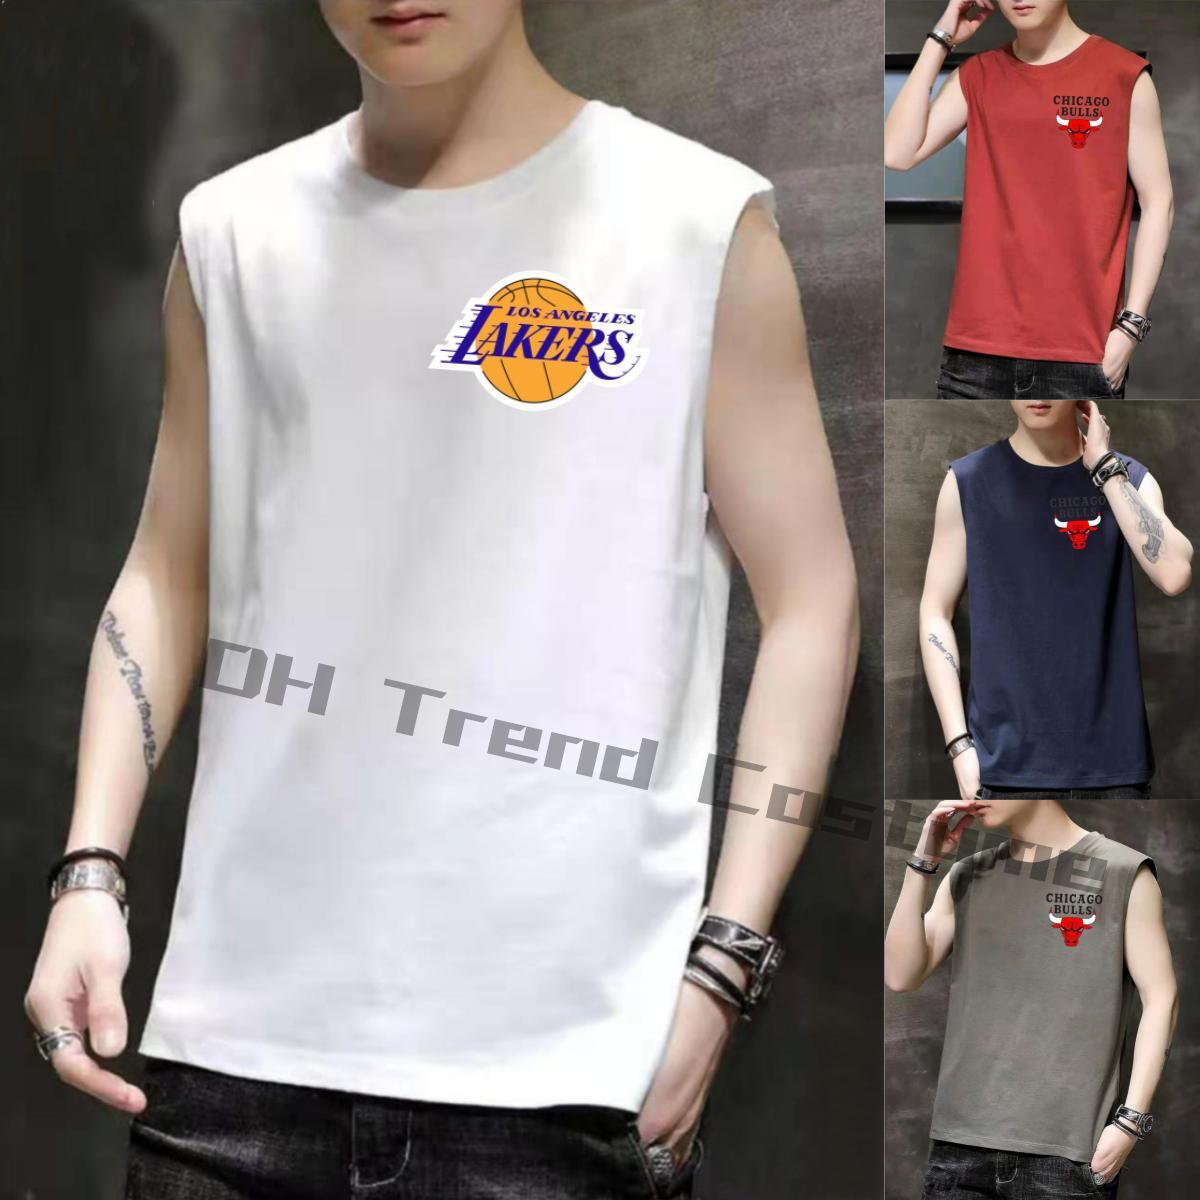 New COD Men's Bulls Lakers jersey sando unisex high quality Only ₱199.